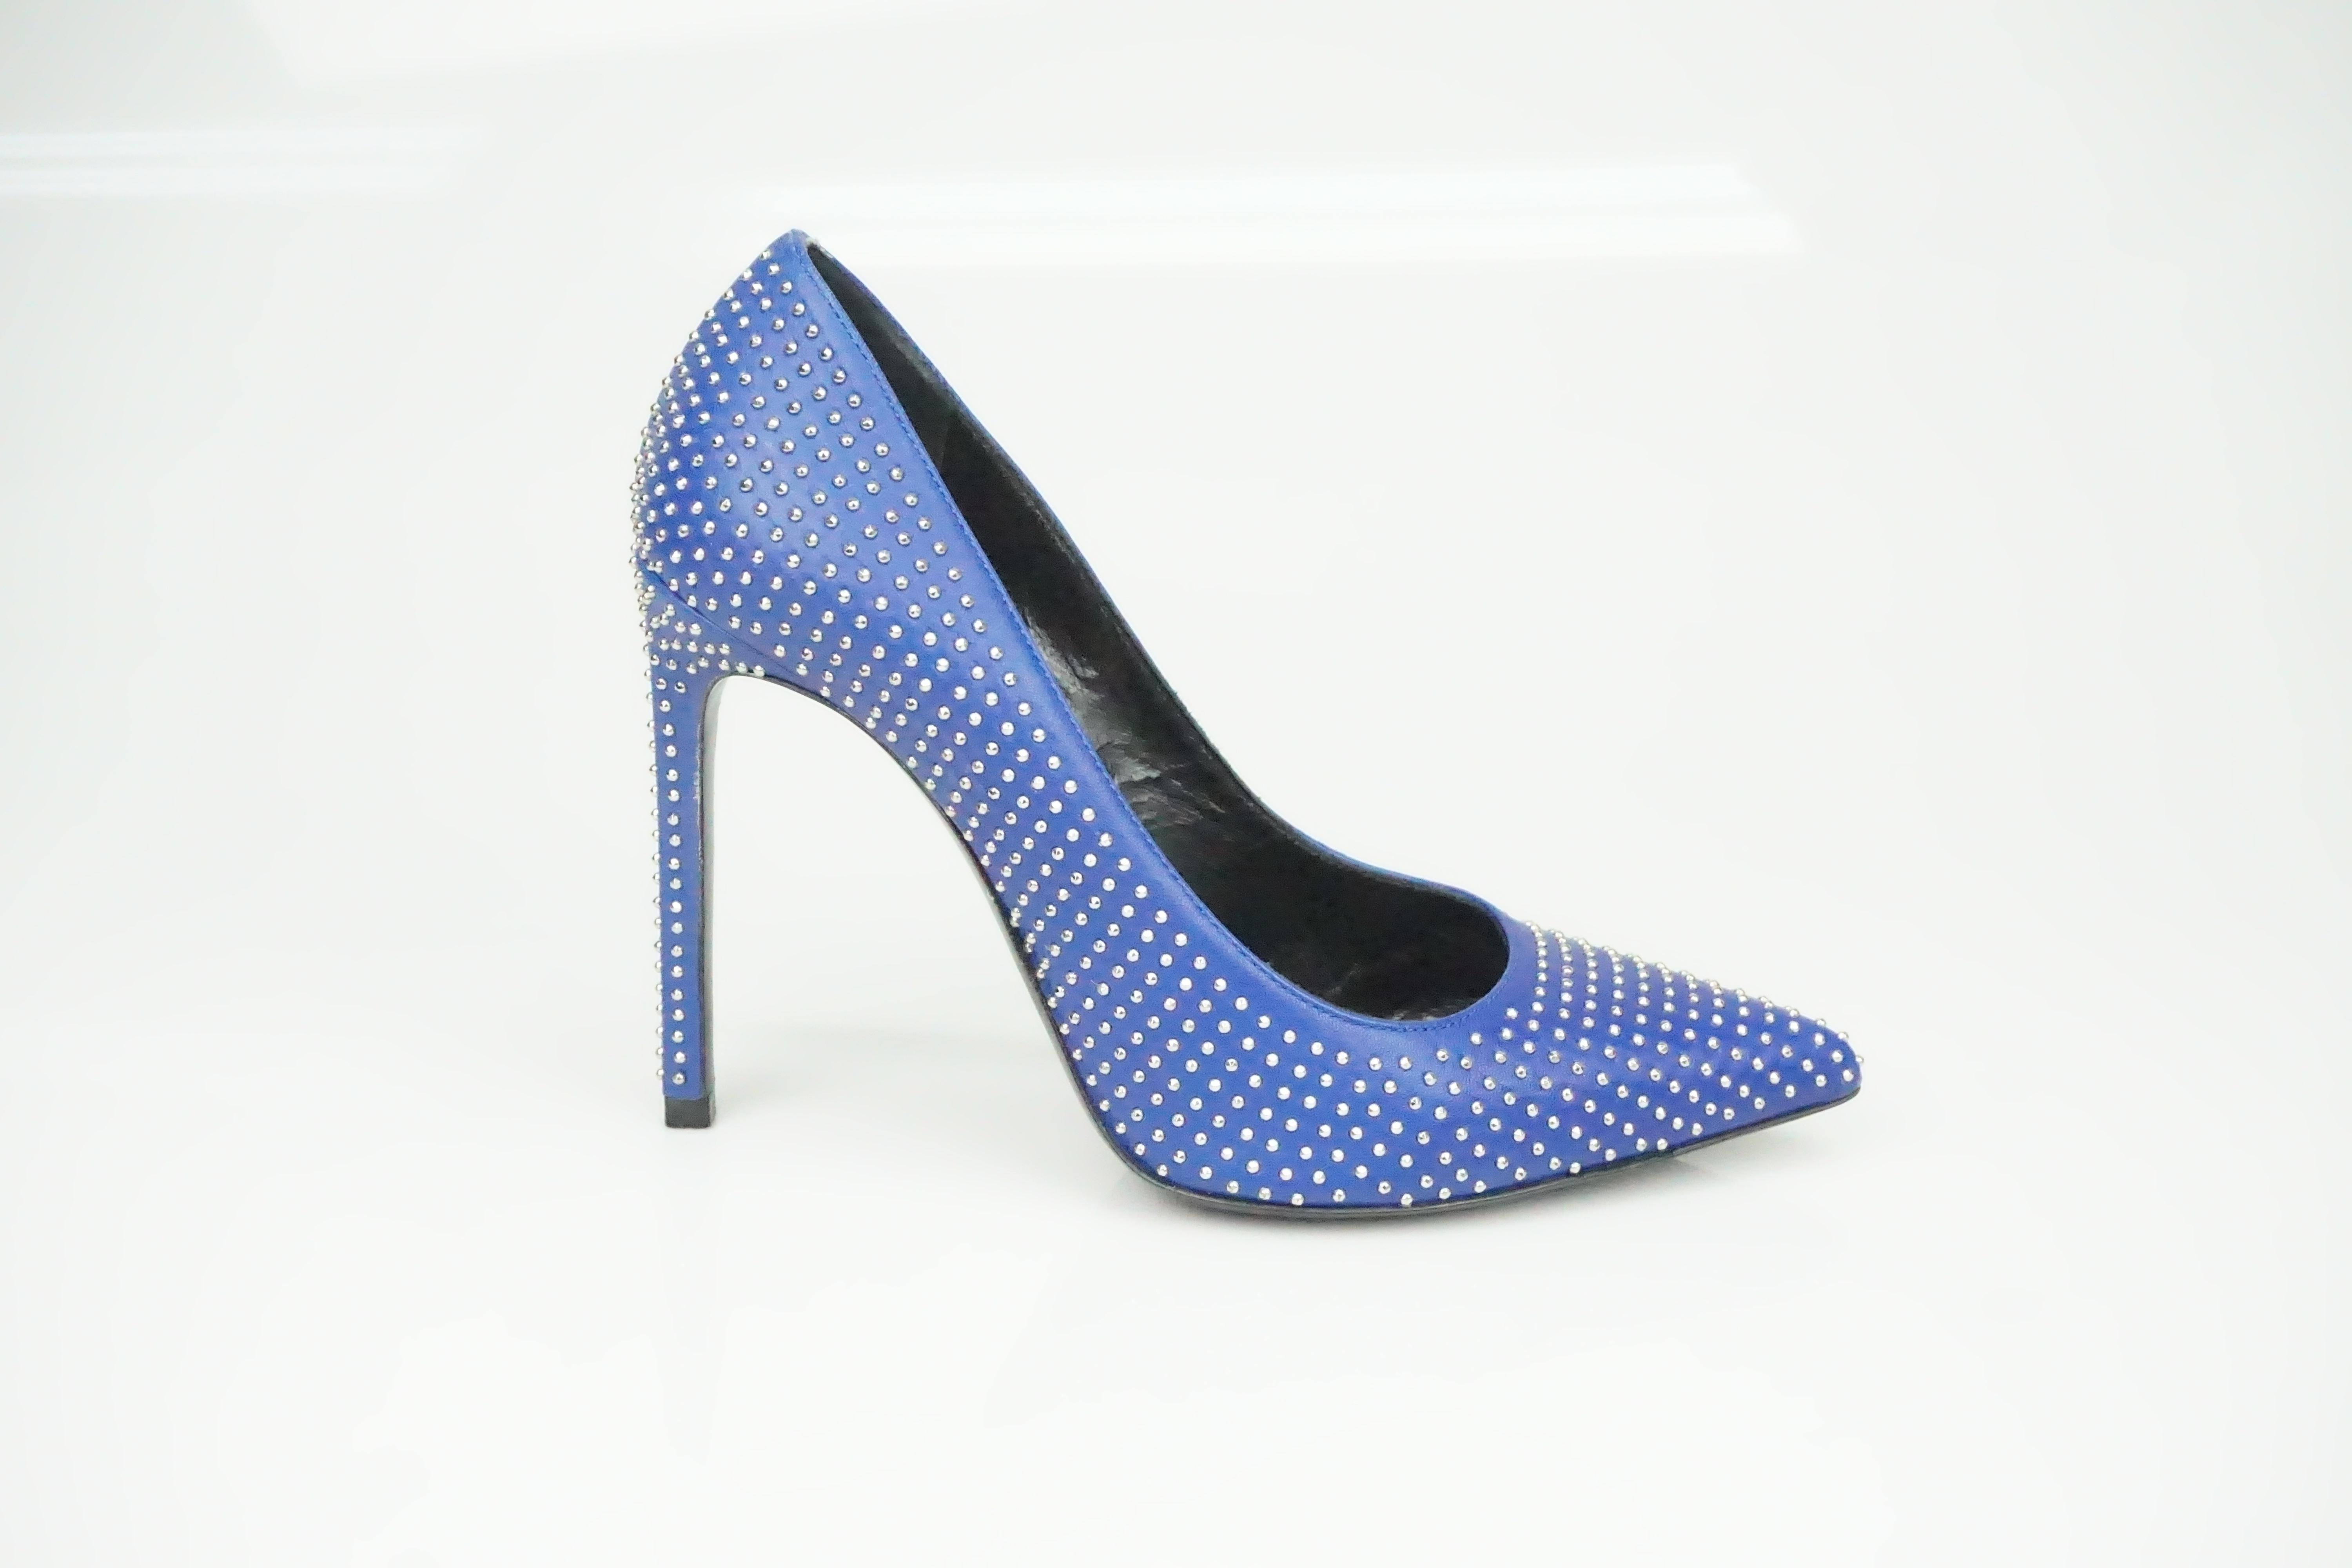 Saint Laurent Royal Blue Calfskin Micro Stud Pumps - 36  These gorgeous pumps are in good condition. The shoes have some use on the bottom. Other than that they are in very good condition. The shoe is covered in silver metal studs and there is a